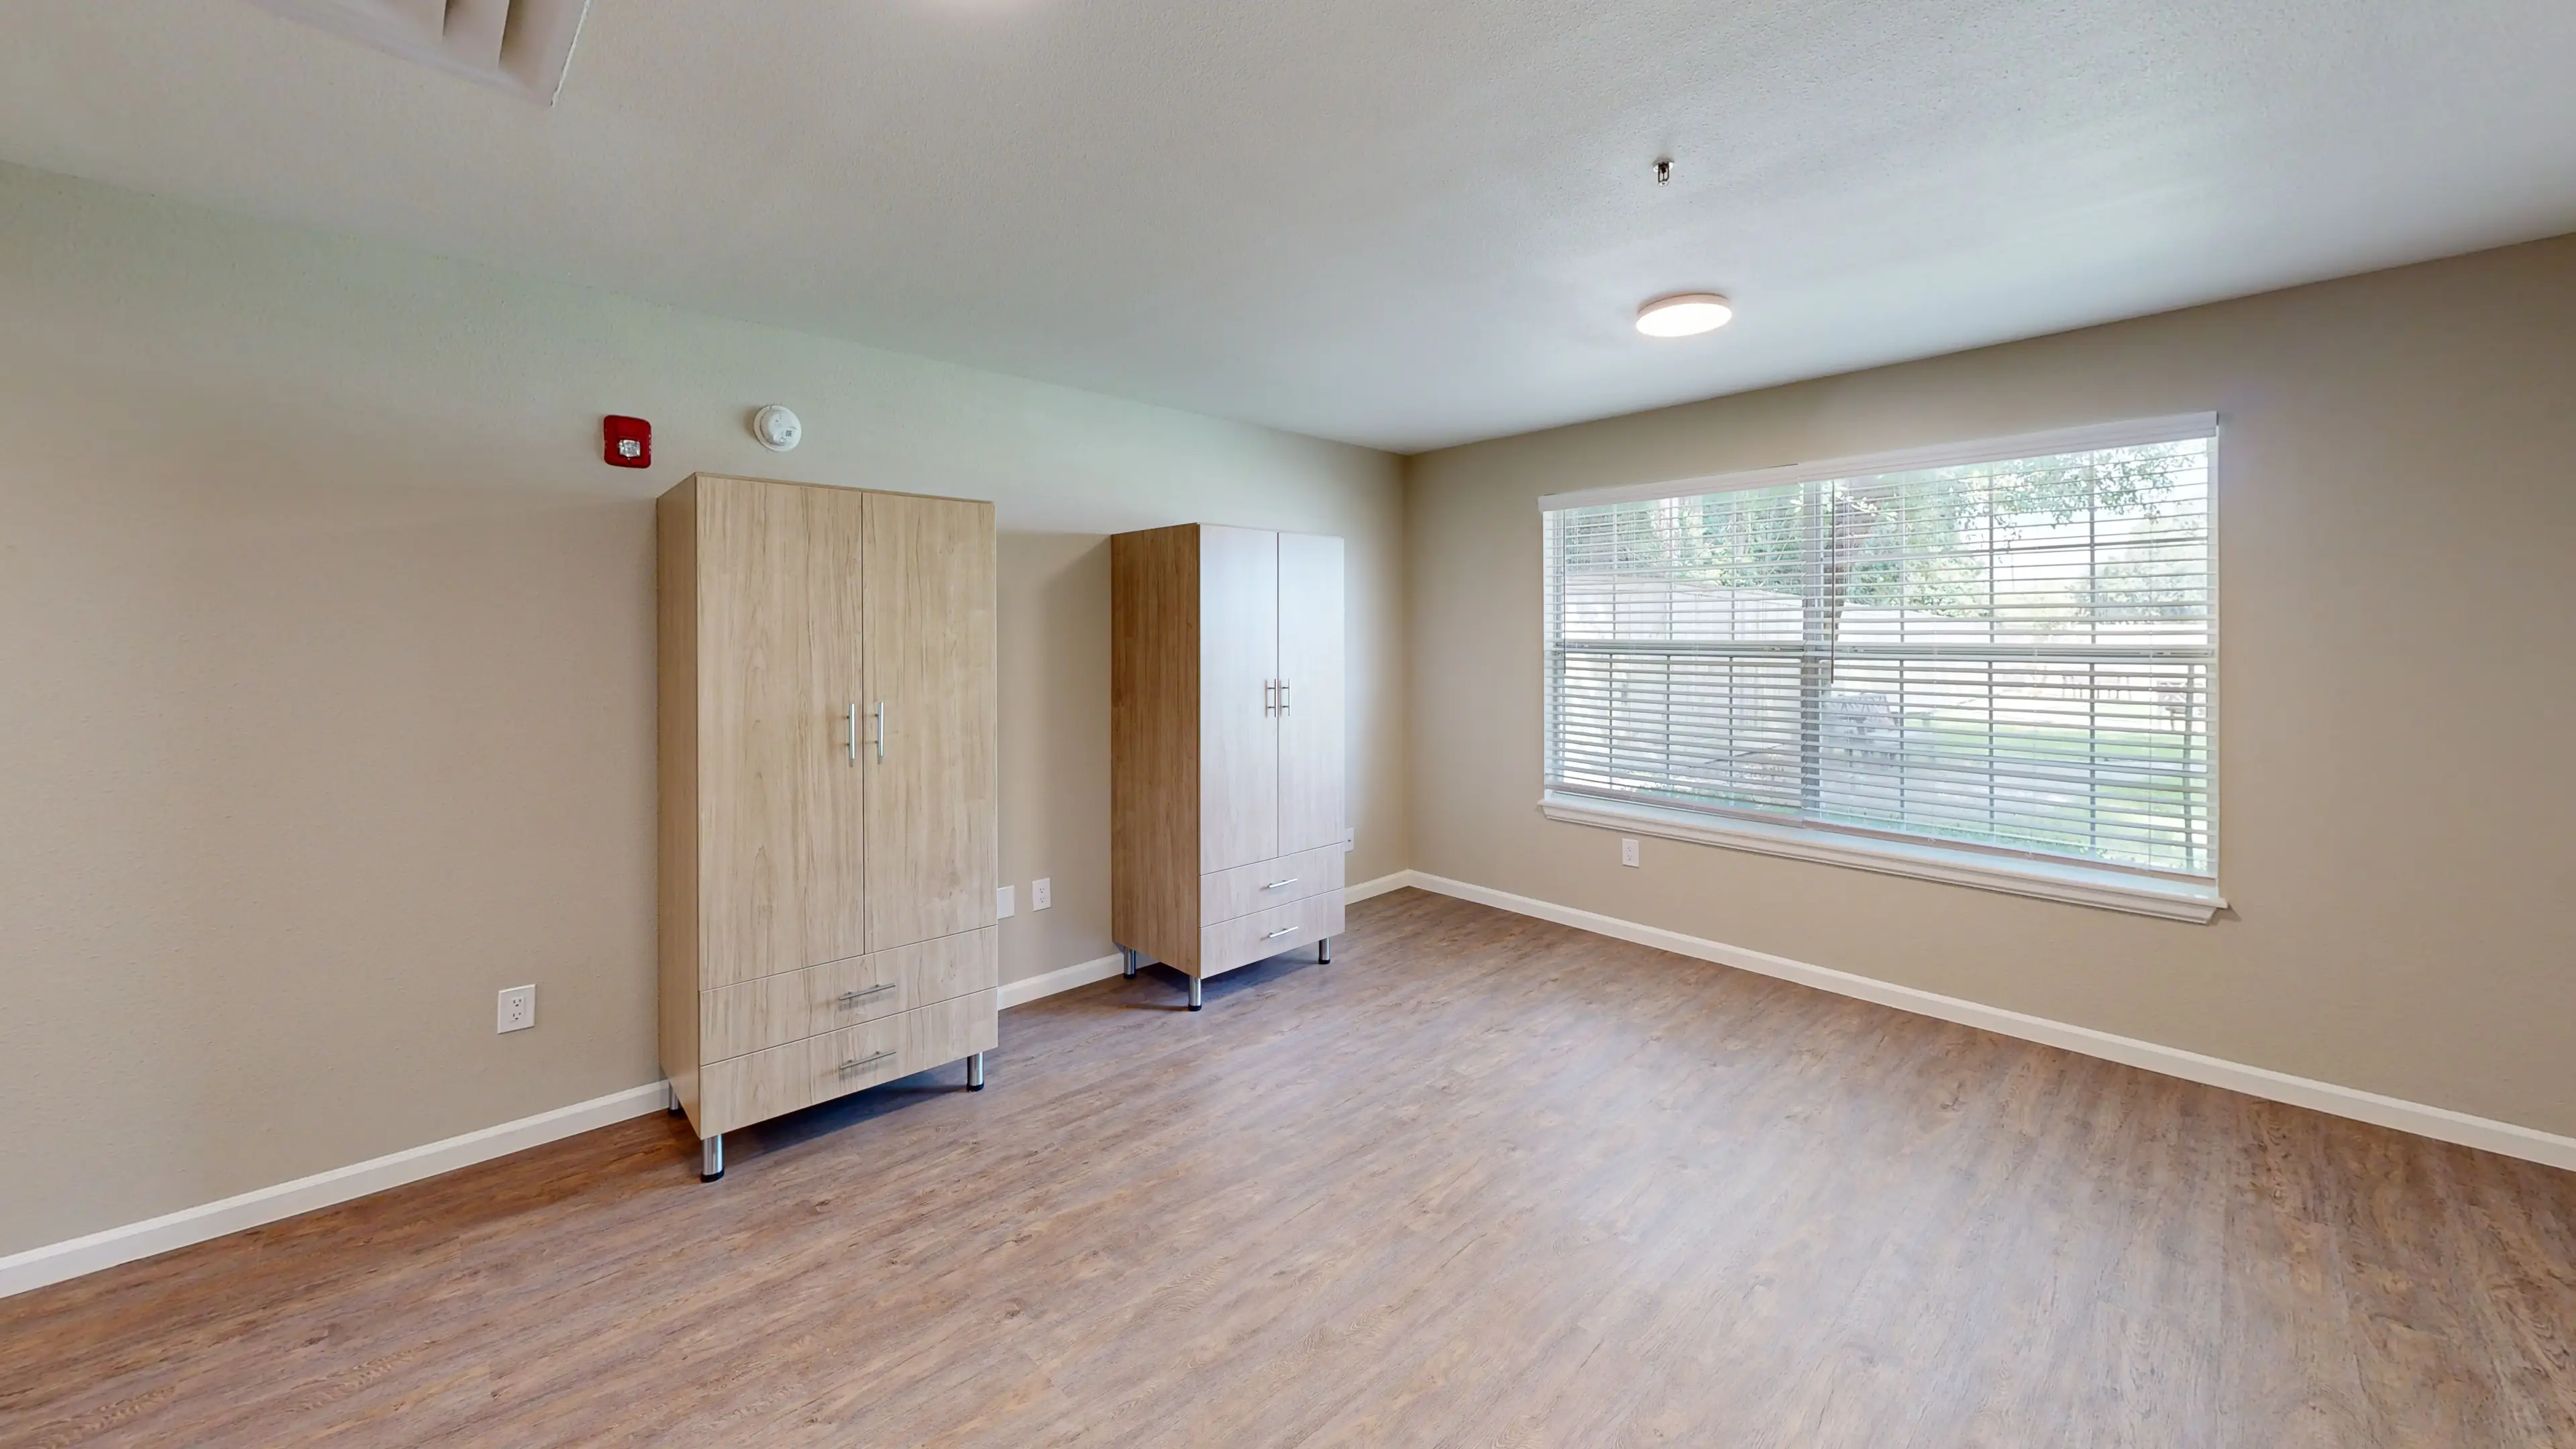 Auberge at Kingwood Memory Care 1 bed, 1 bath, Private Bedroom